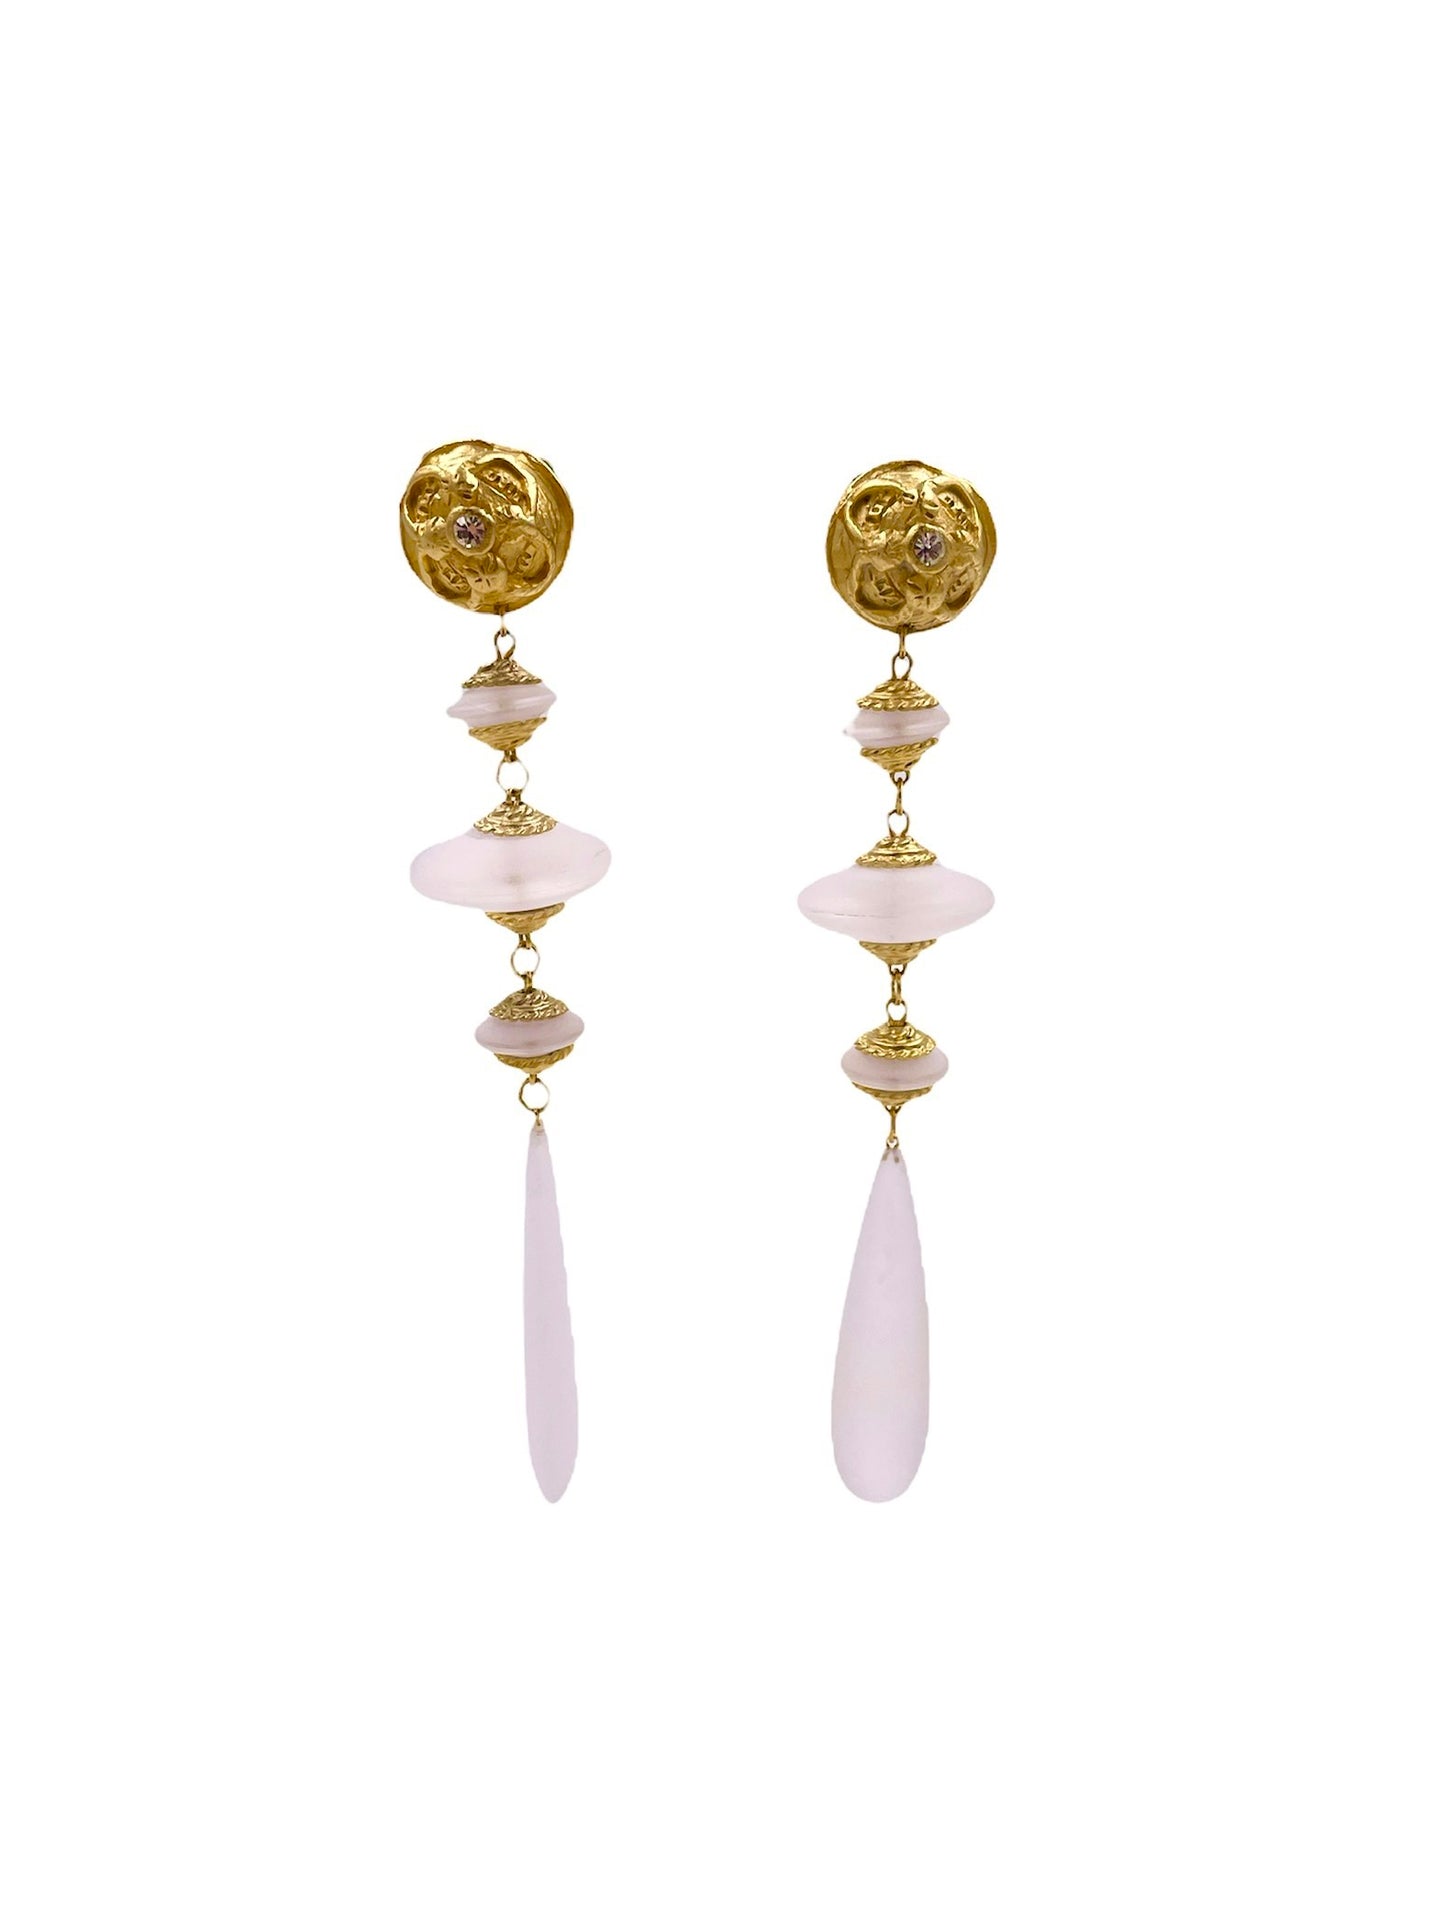 Lucite & Gold Drop Earrings